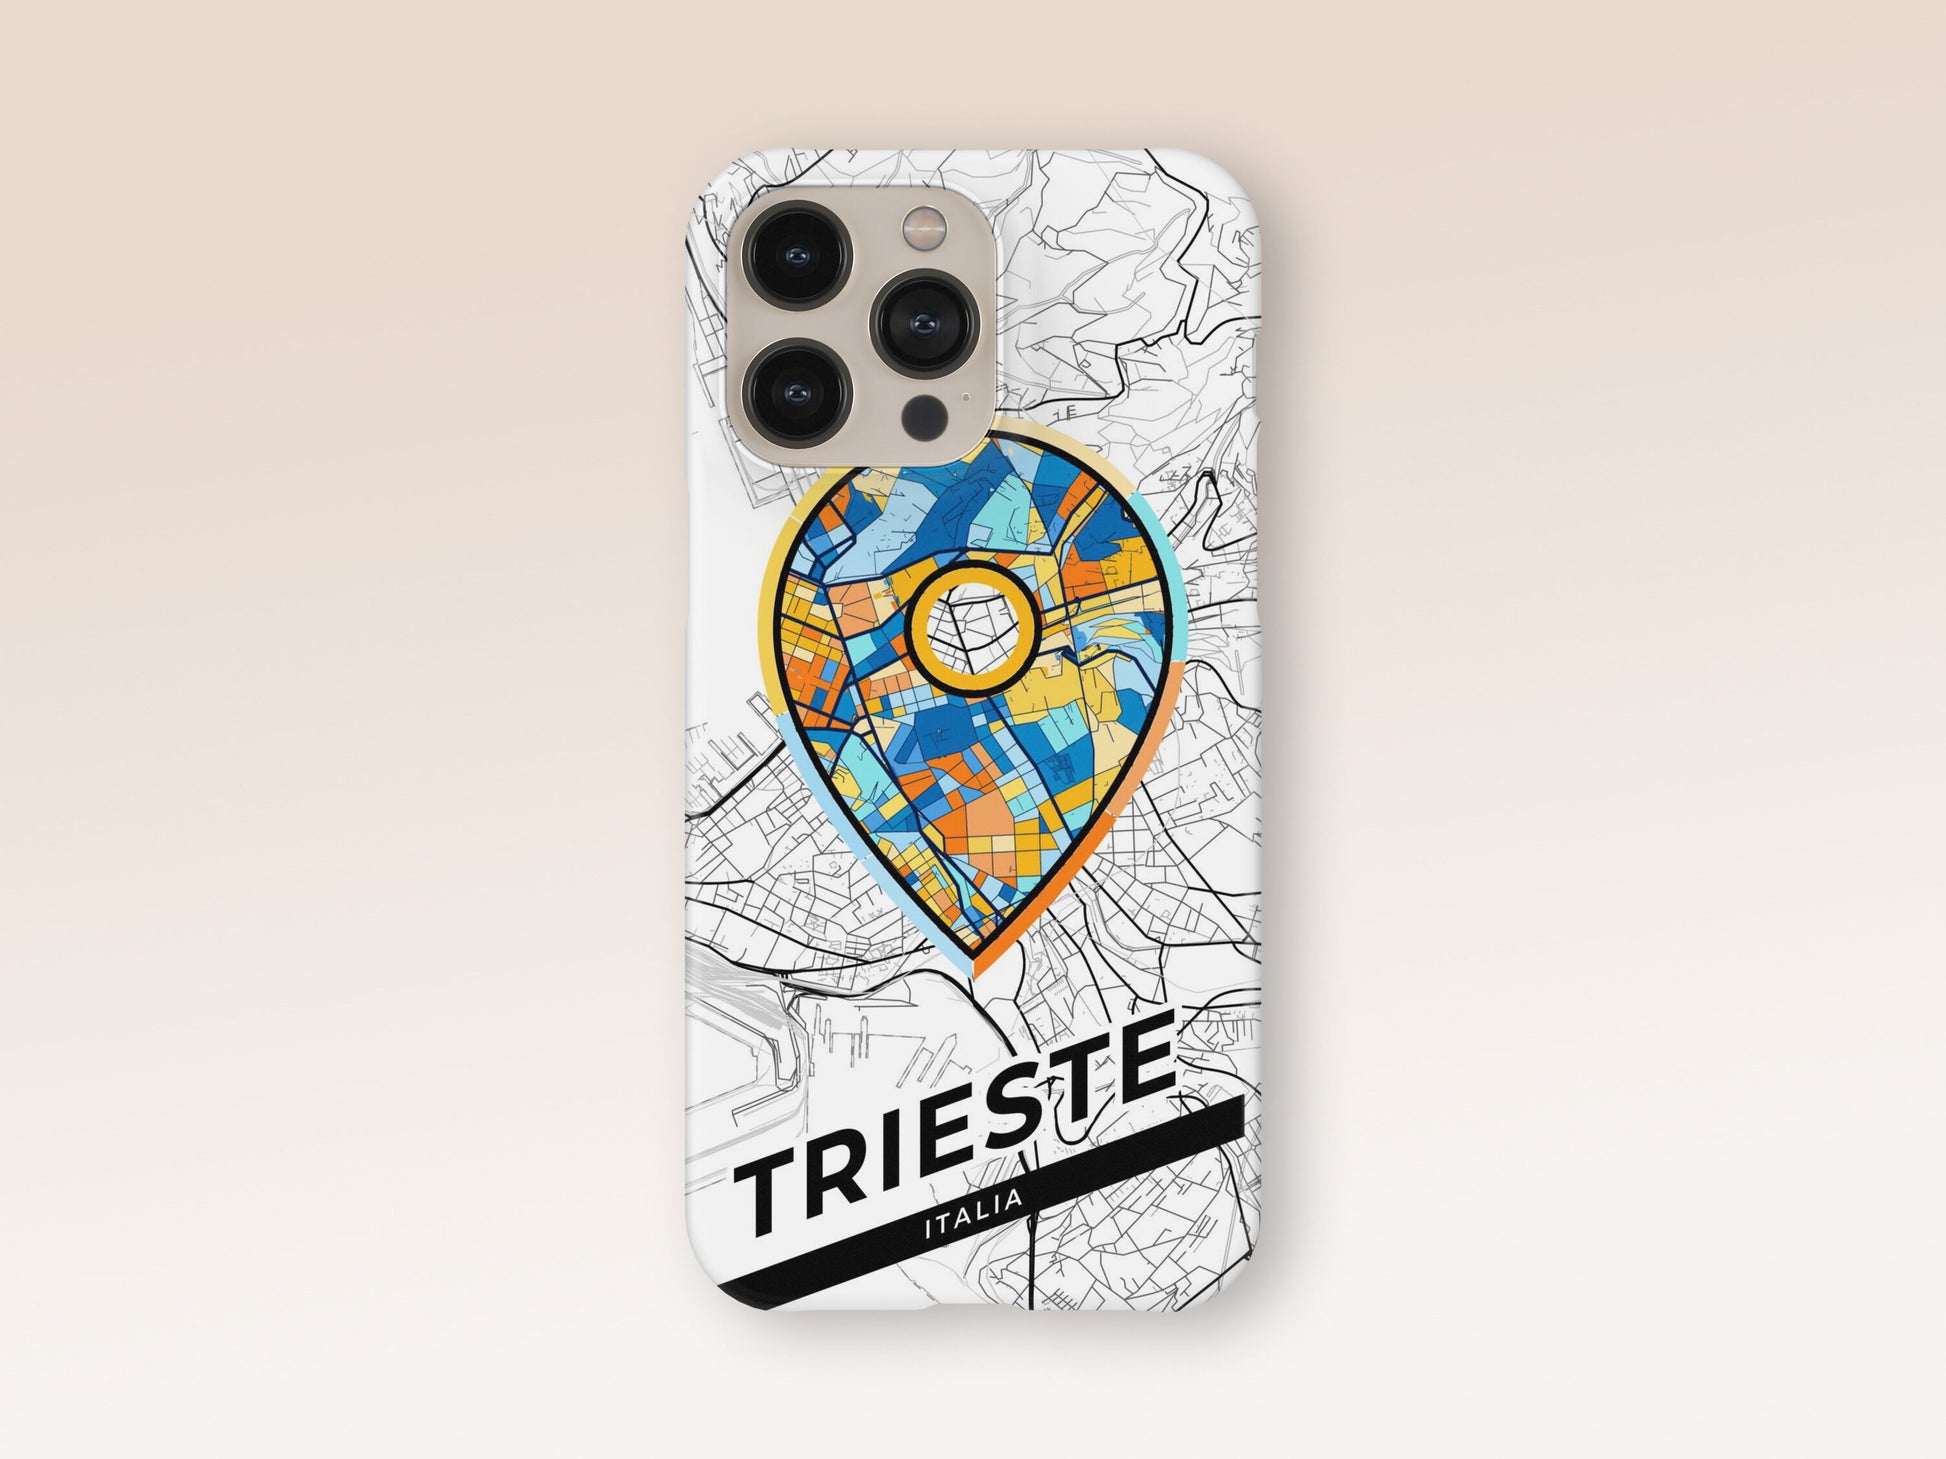 Trieste Italy slim phone case with colorful icon 1